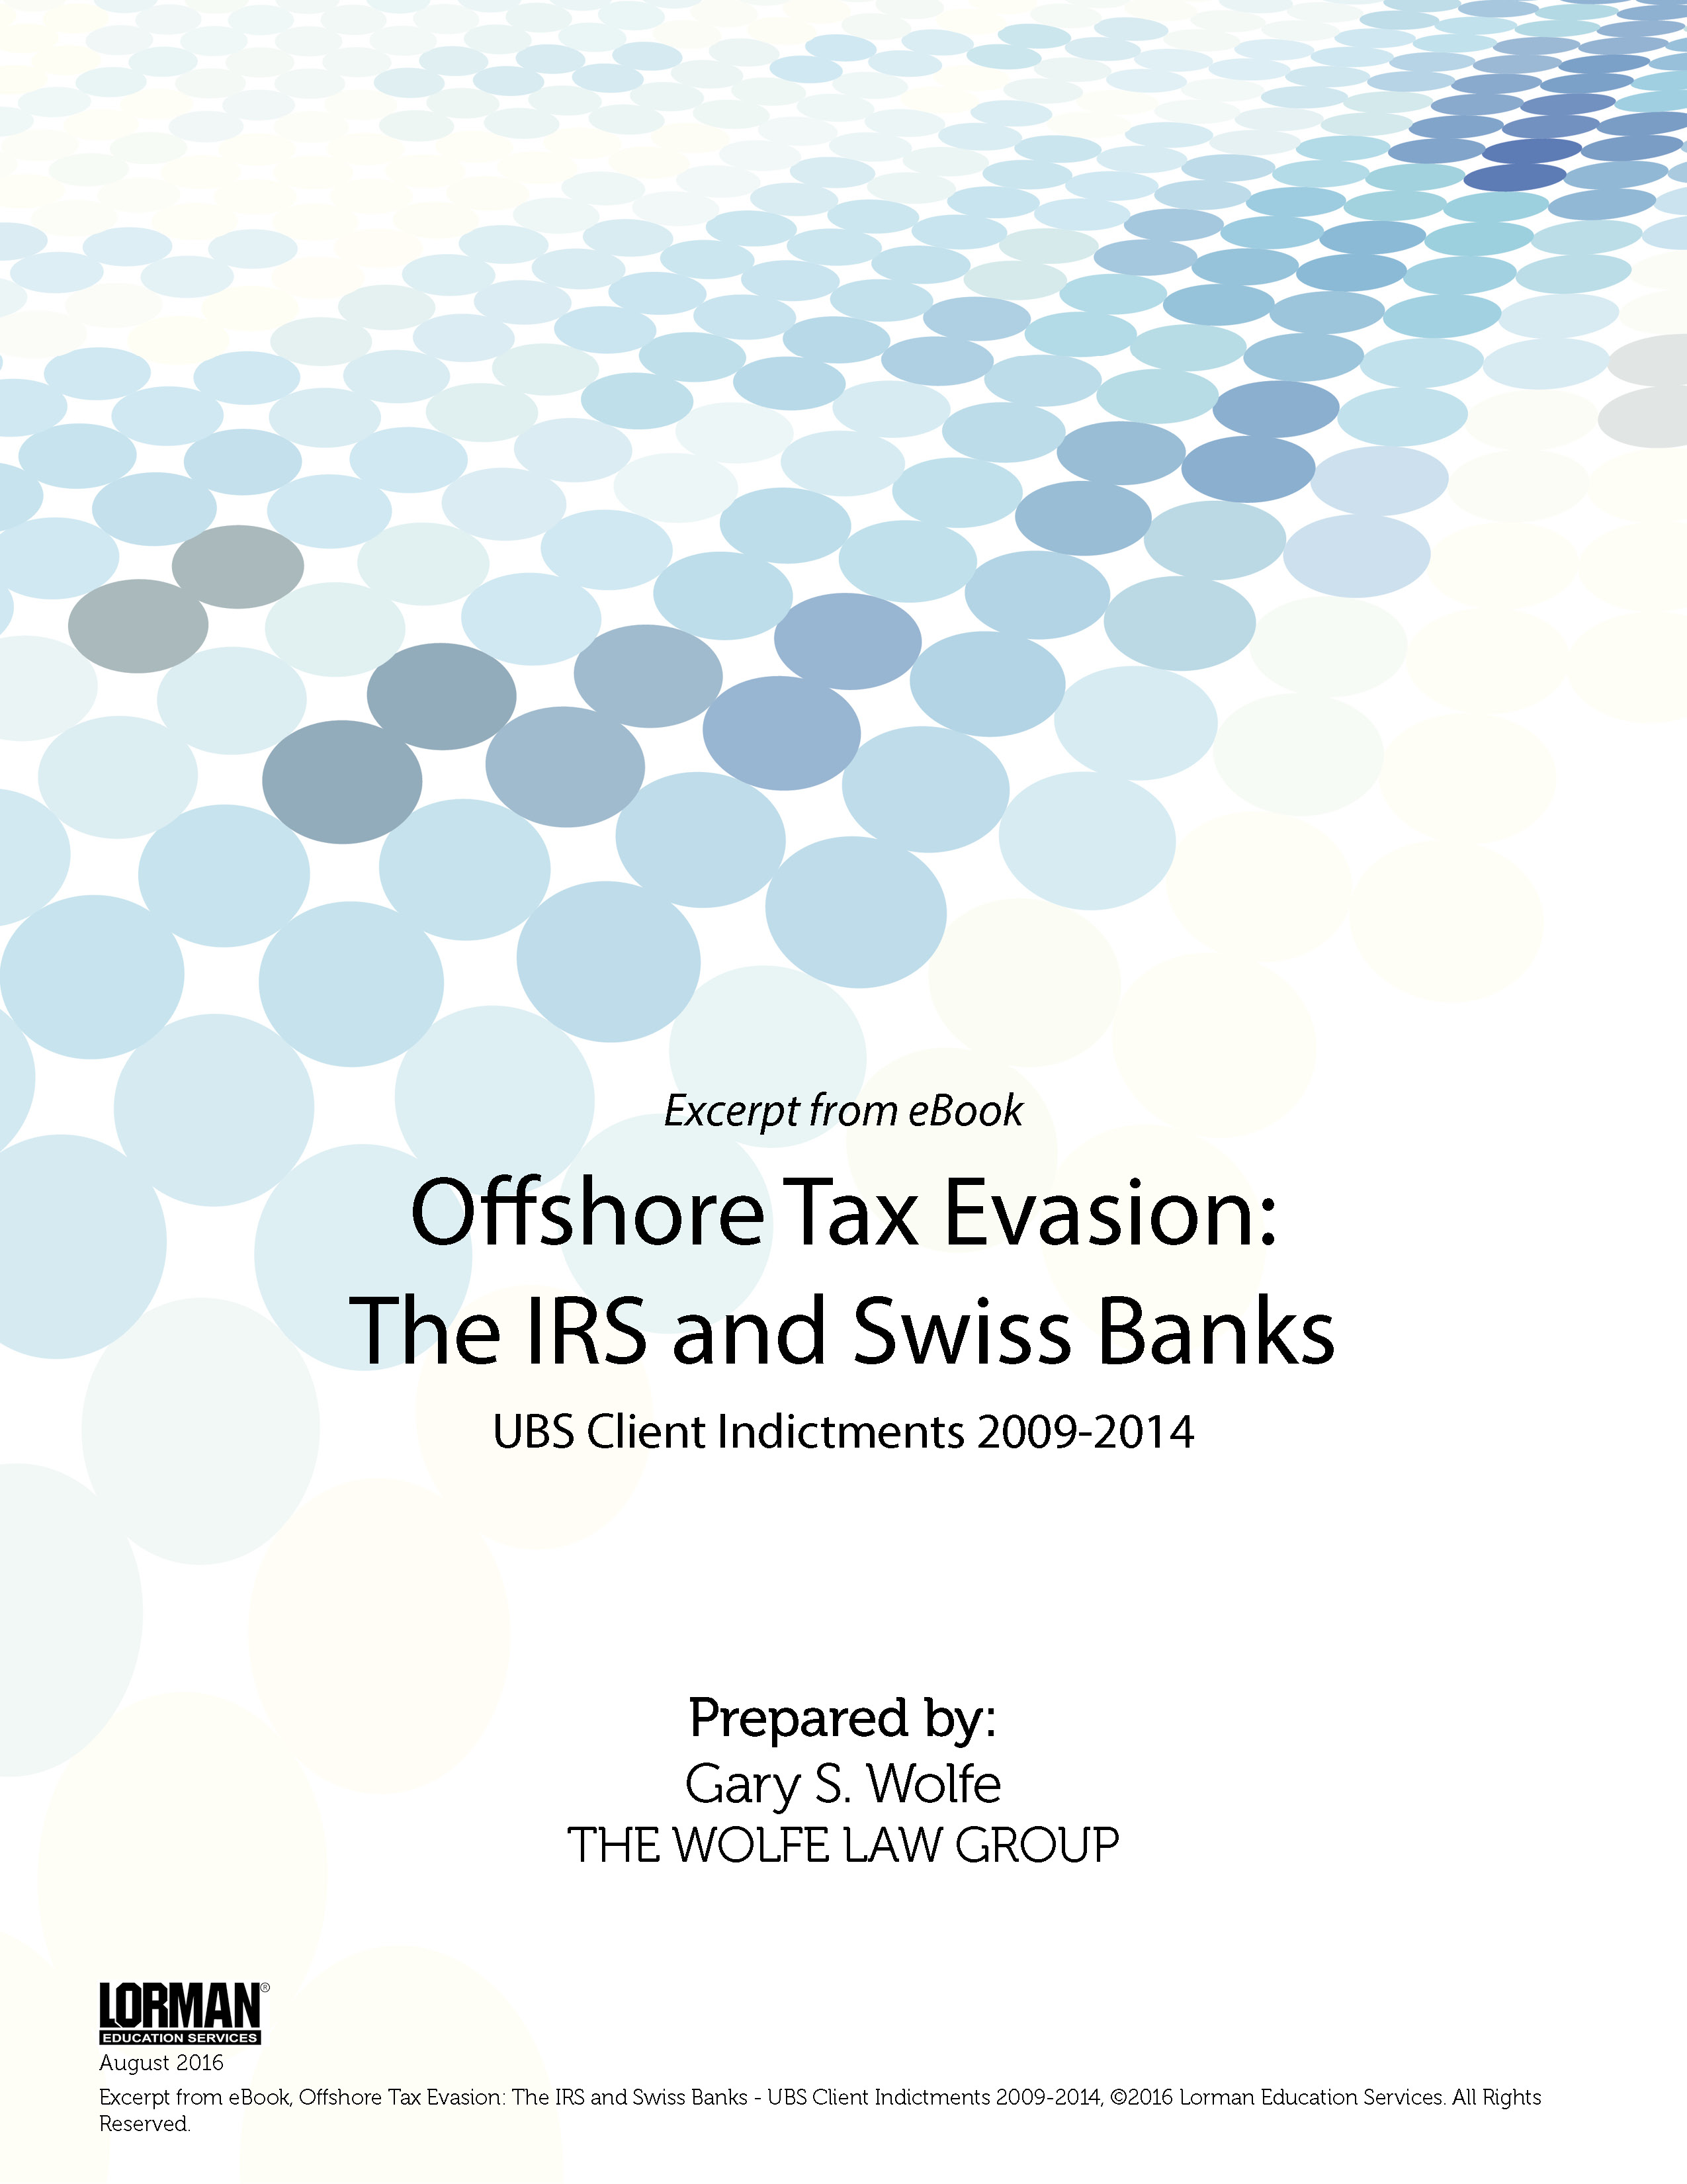 Offshore Tax Evasion - The IRS and Swiss Banks - UBS Client Indictments 2009-2014